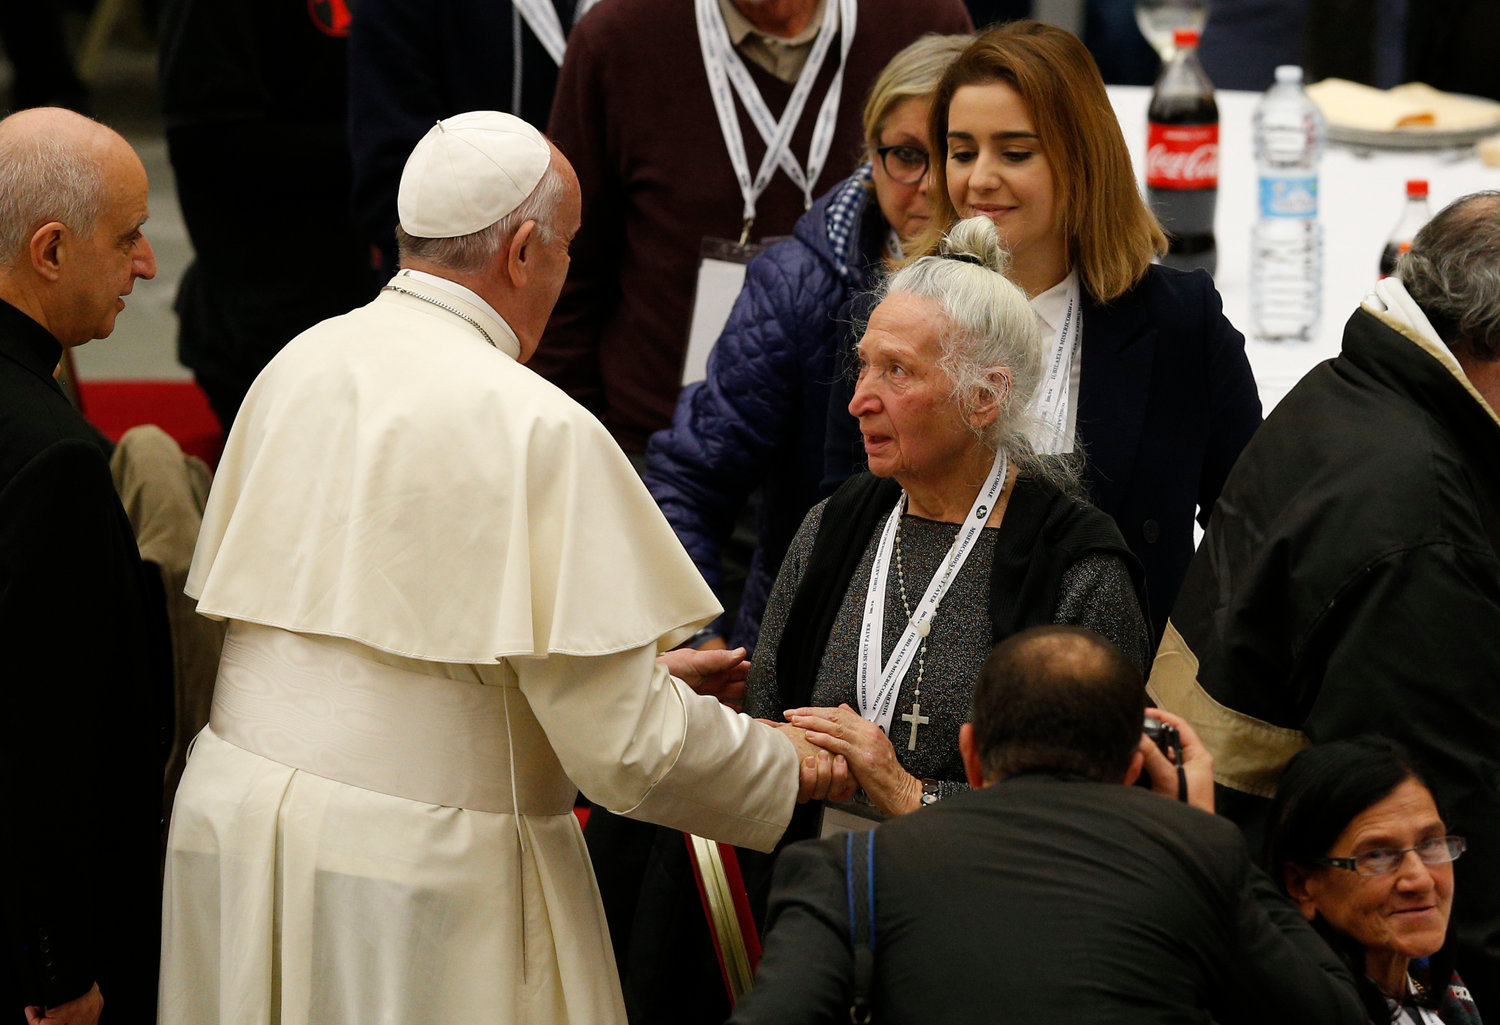 Pope Francis greets a woman as he arrives to eat lunch with the poor in the Paul VI hall as he marks World Day of the Poor at the Vatican Nov. 17, 2019.